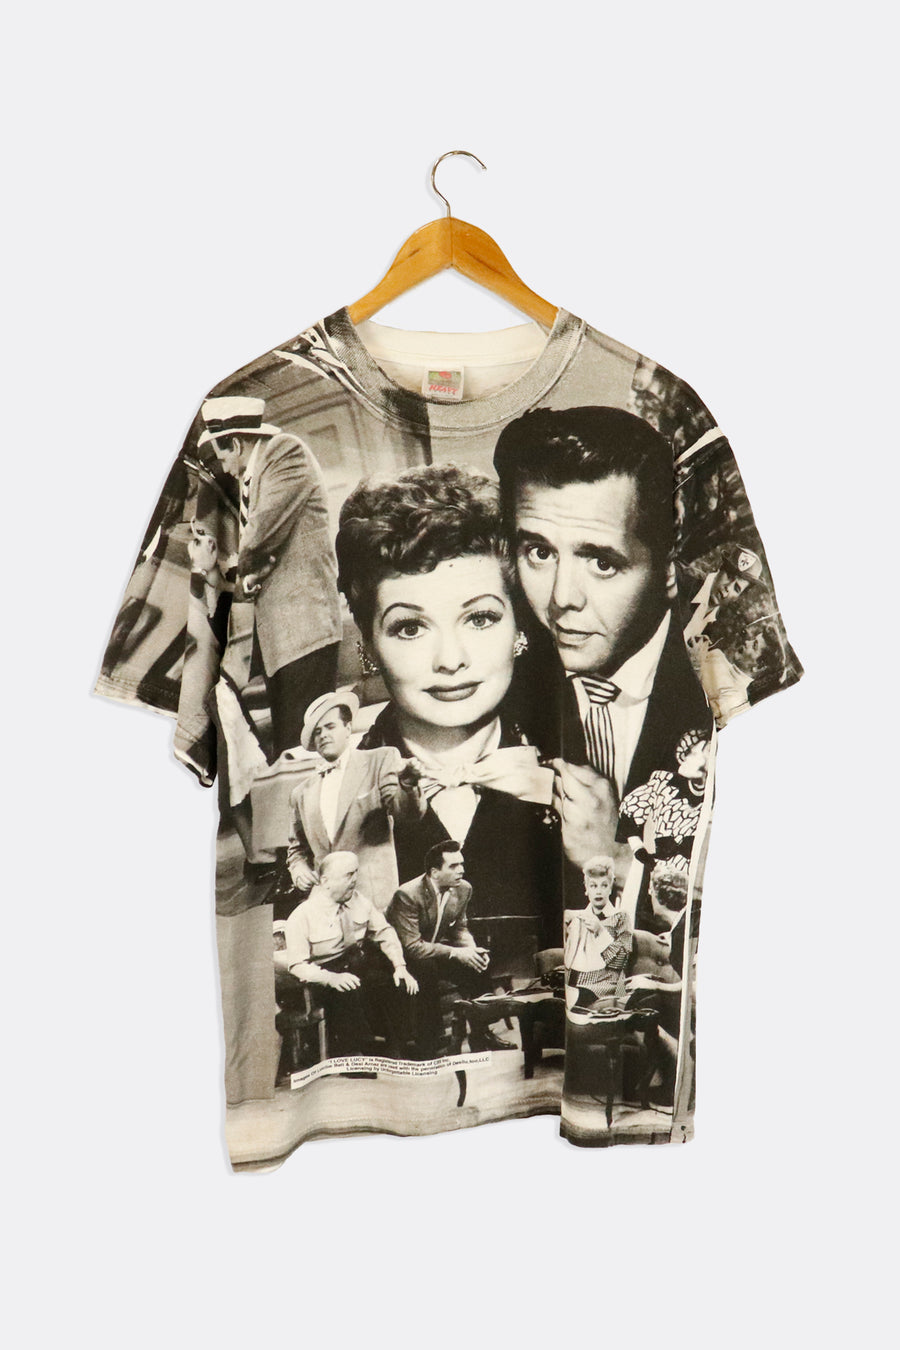 Vintage I Love Lucy Different Shots From Show Black And White All Over Graphic T Shirt Sz L